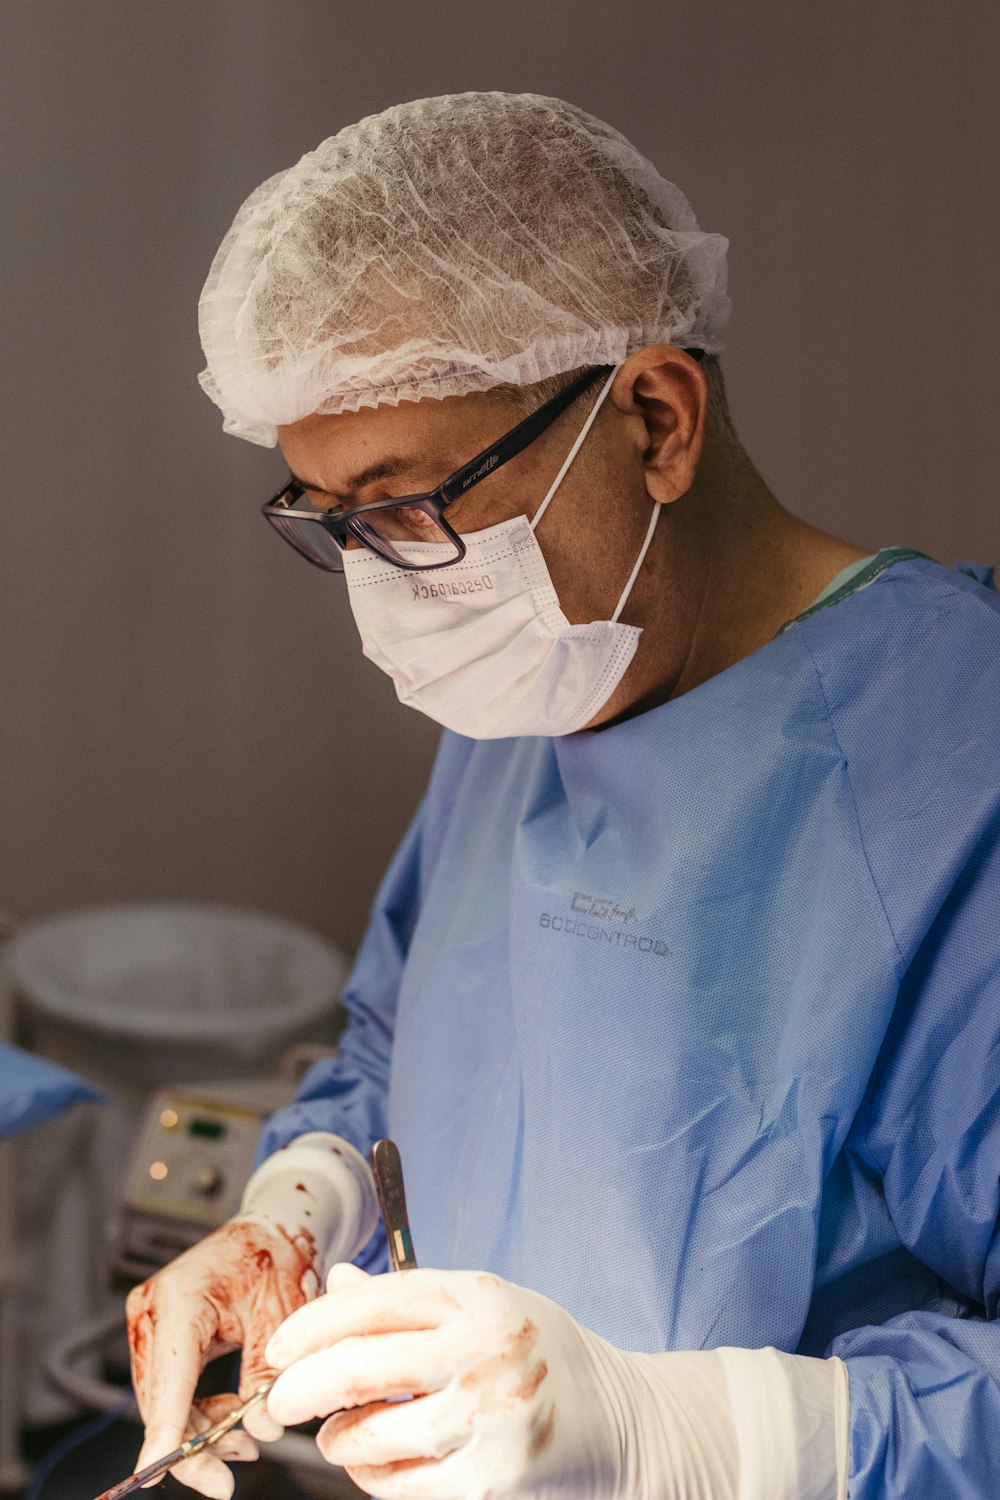 a man in a surgical gown and mask is performing surgery